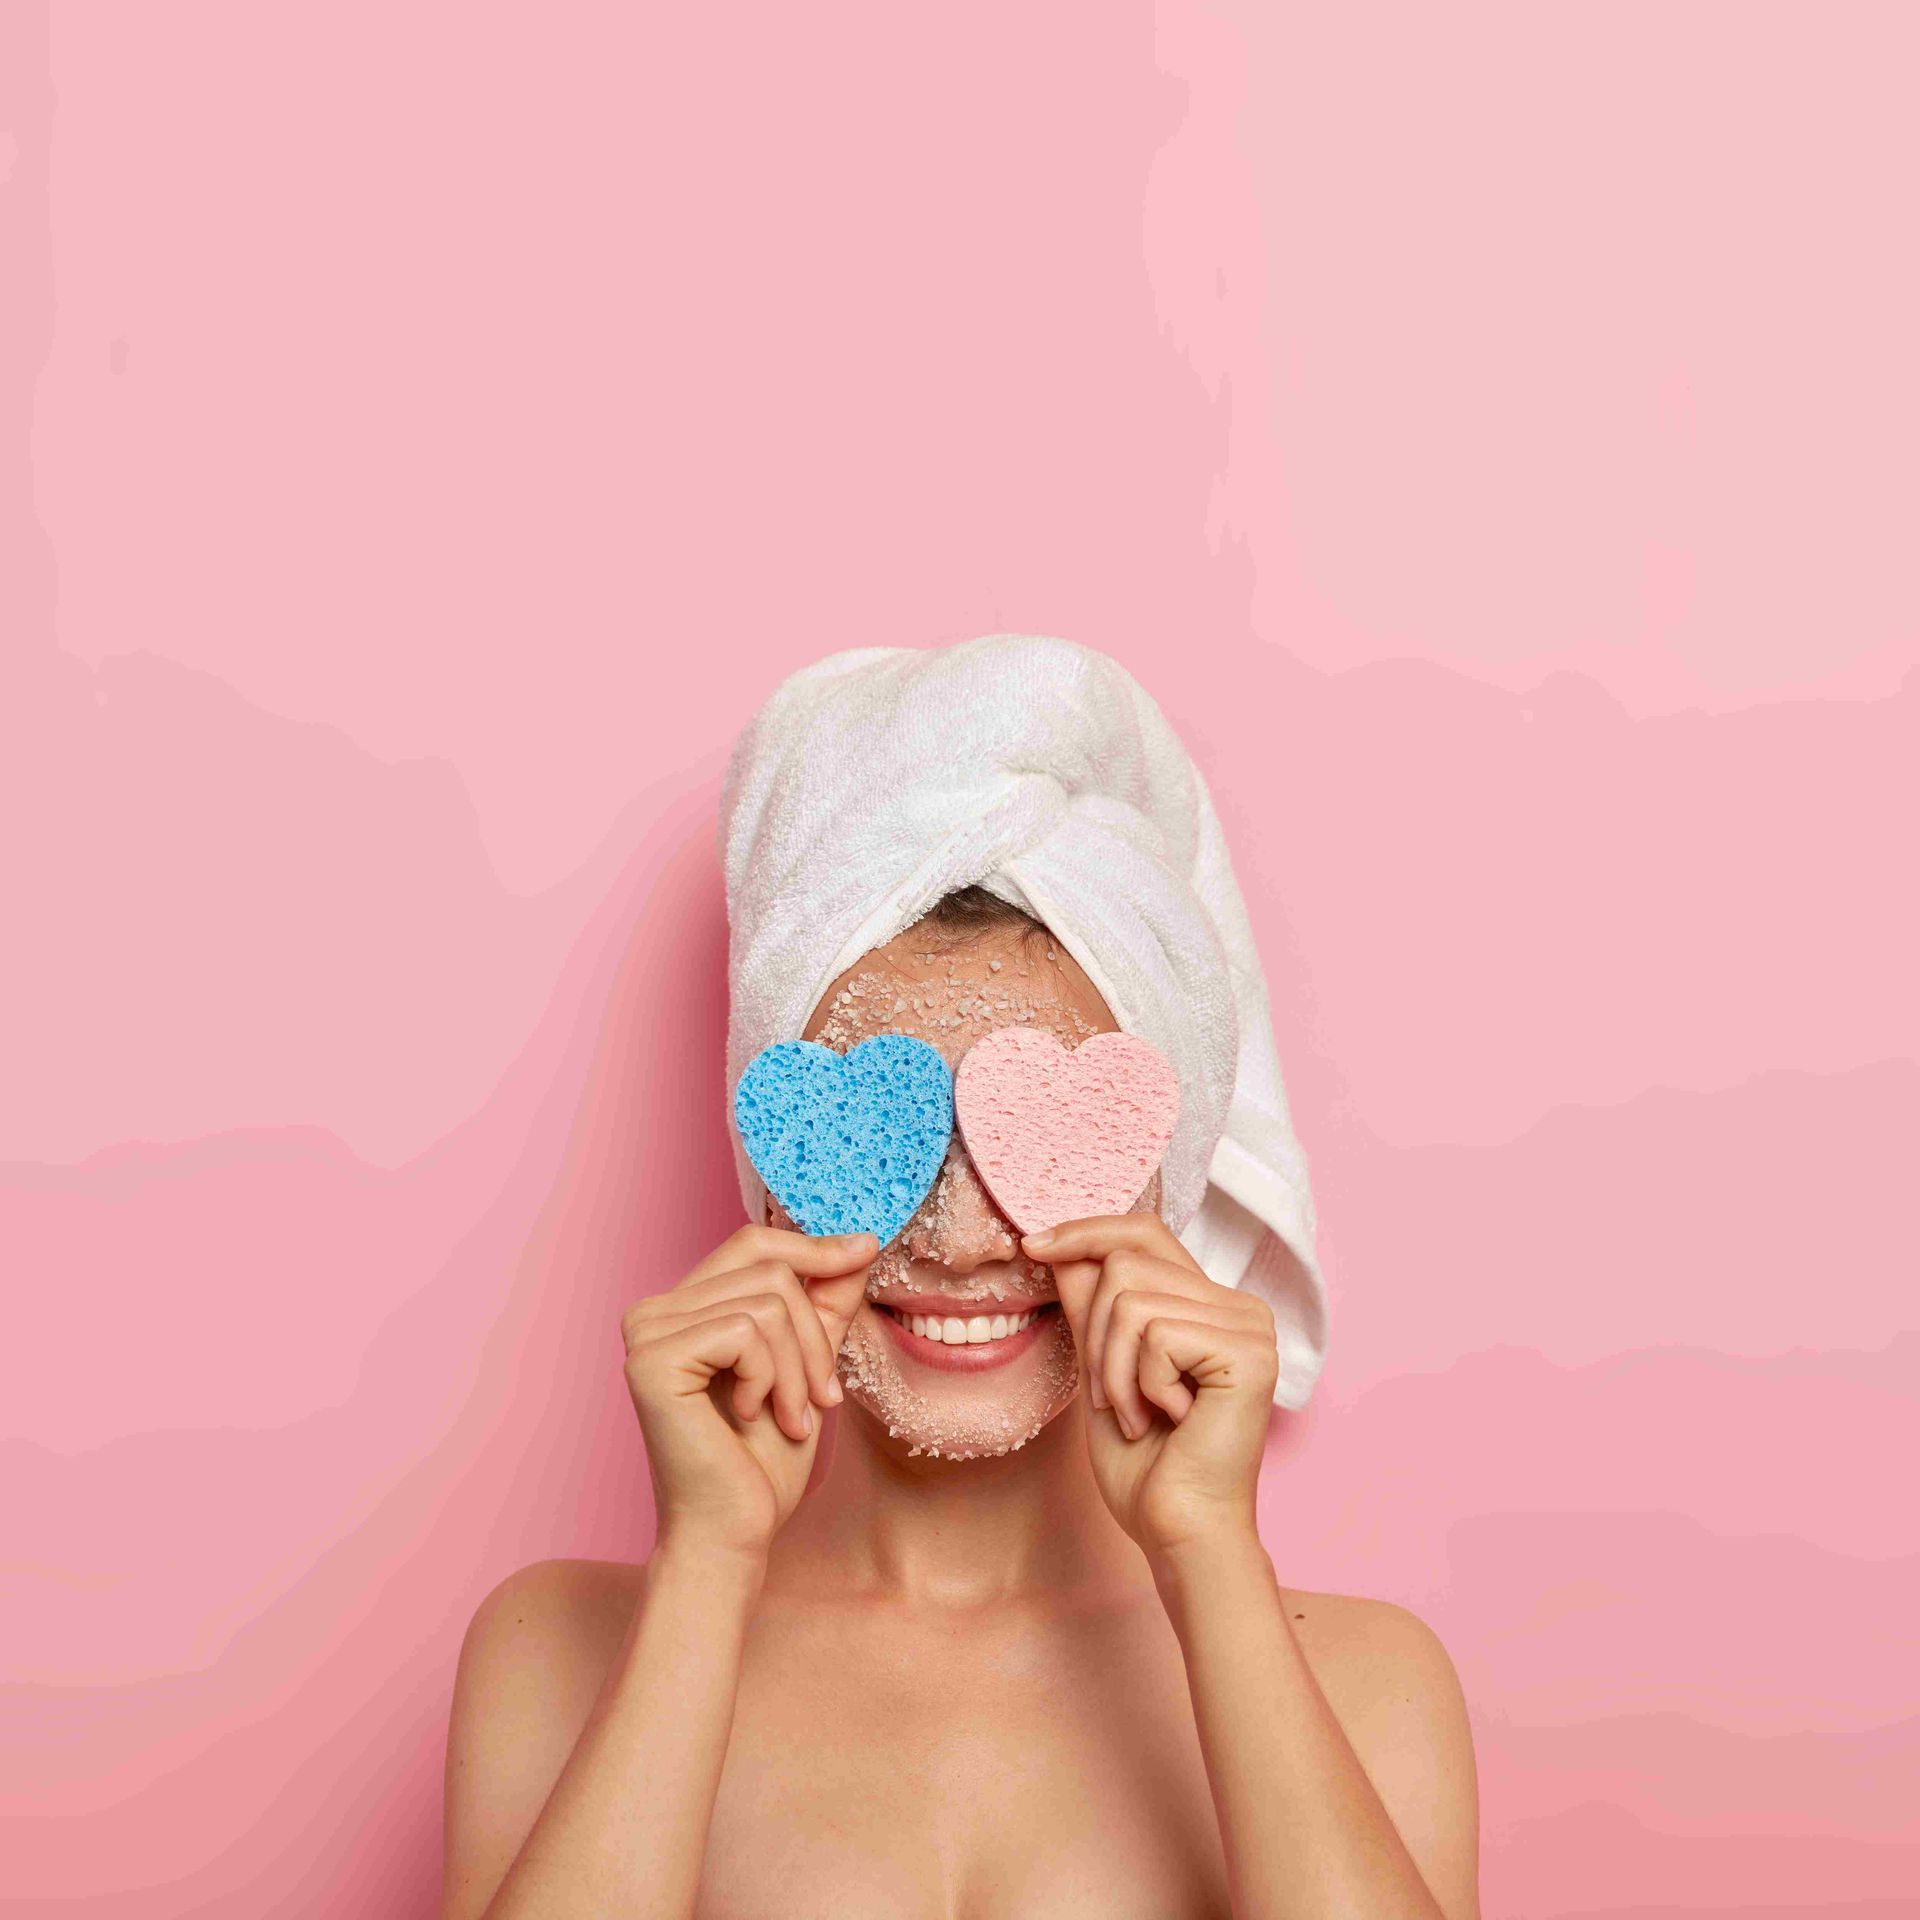 A woman with a pink background and towel on her hair holding heart shapes over her eyes